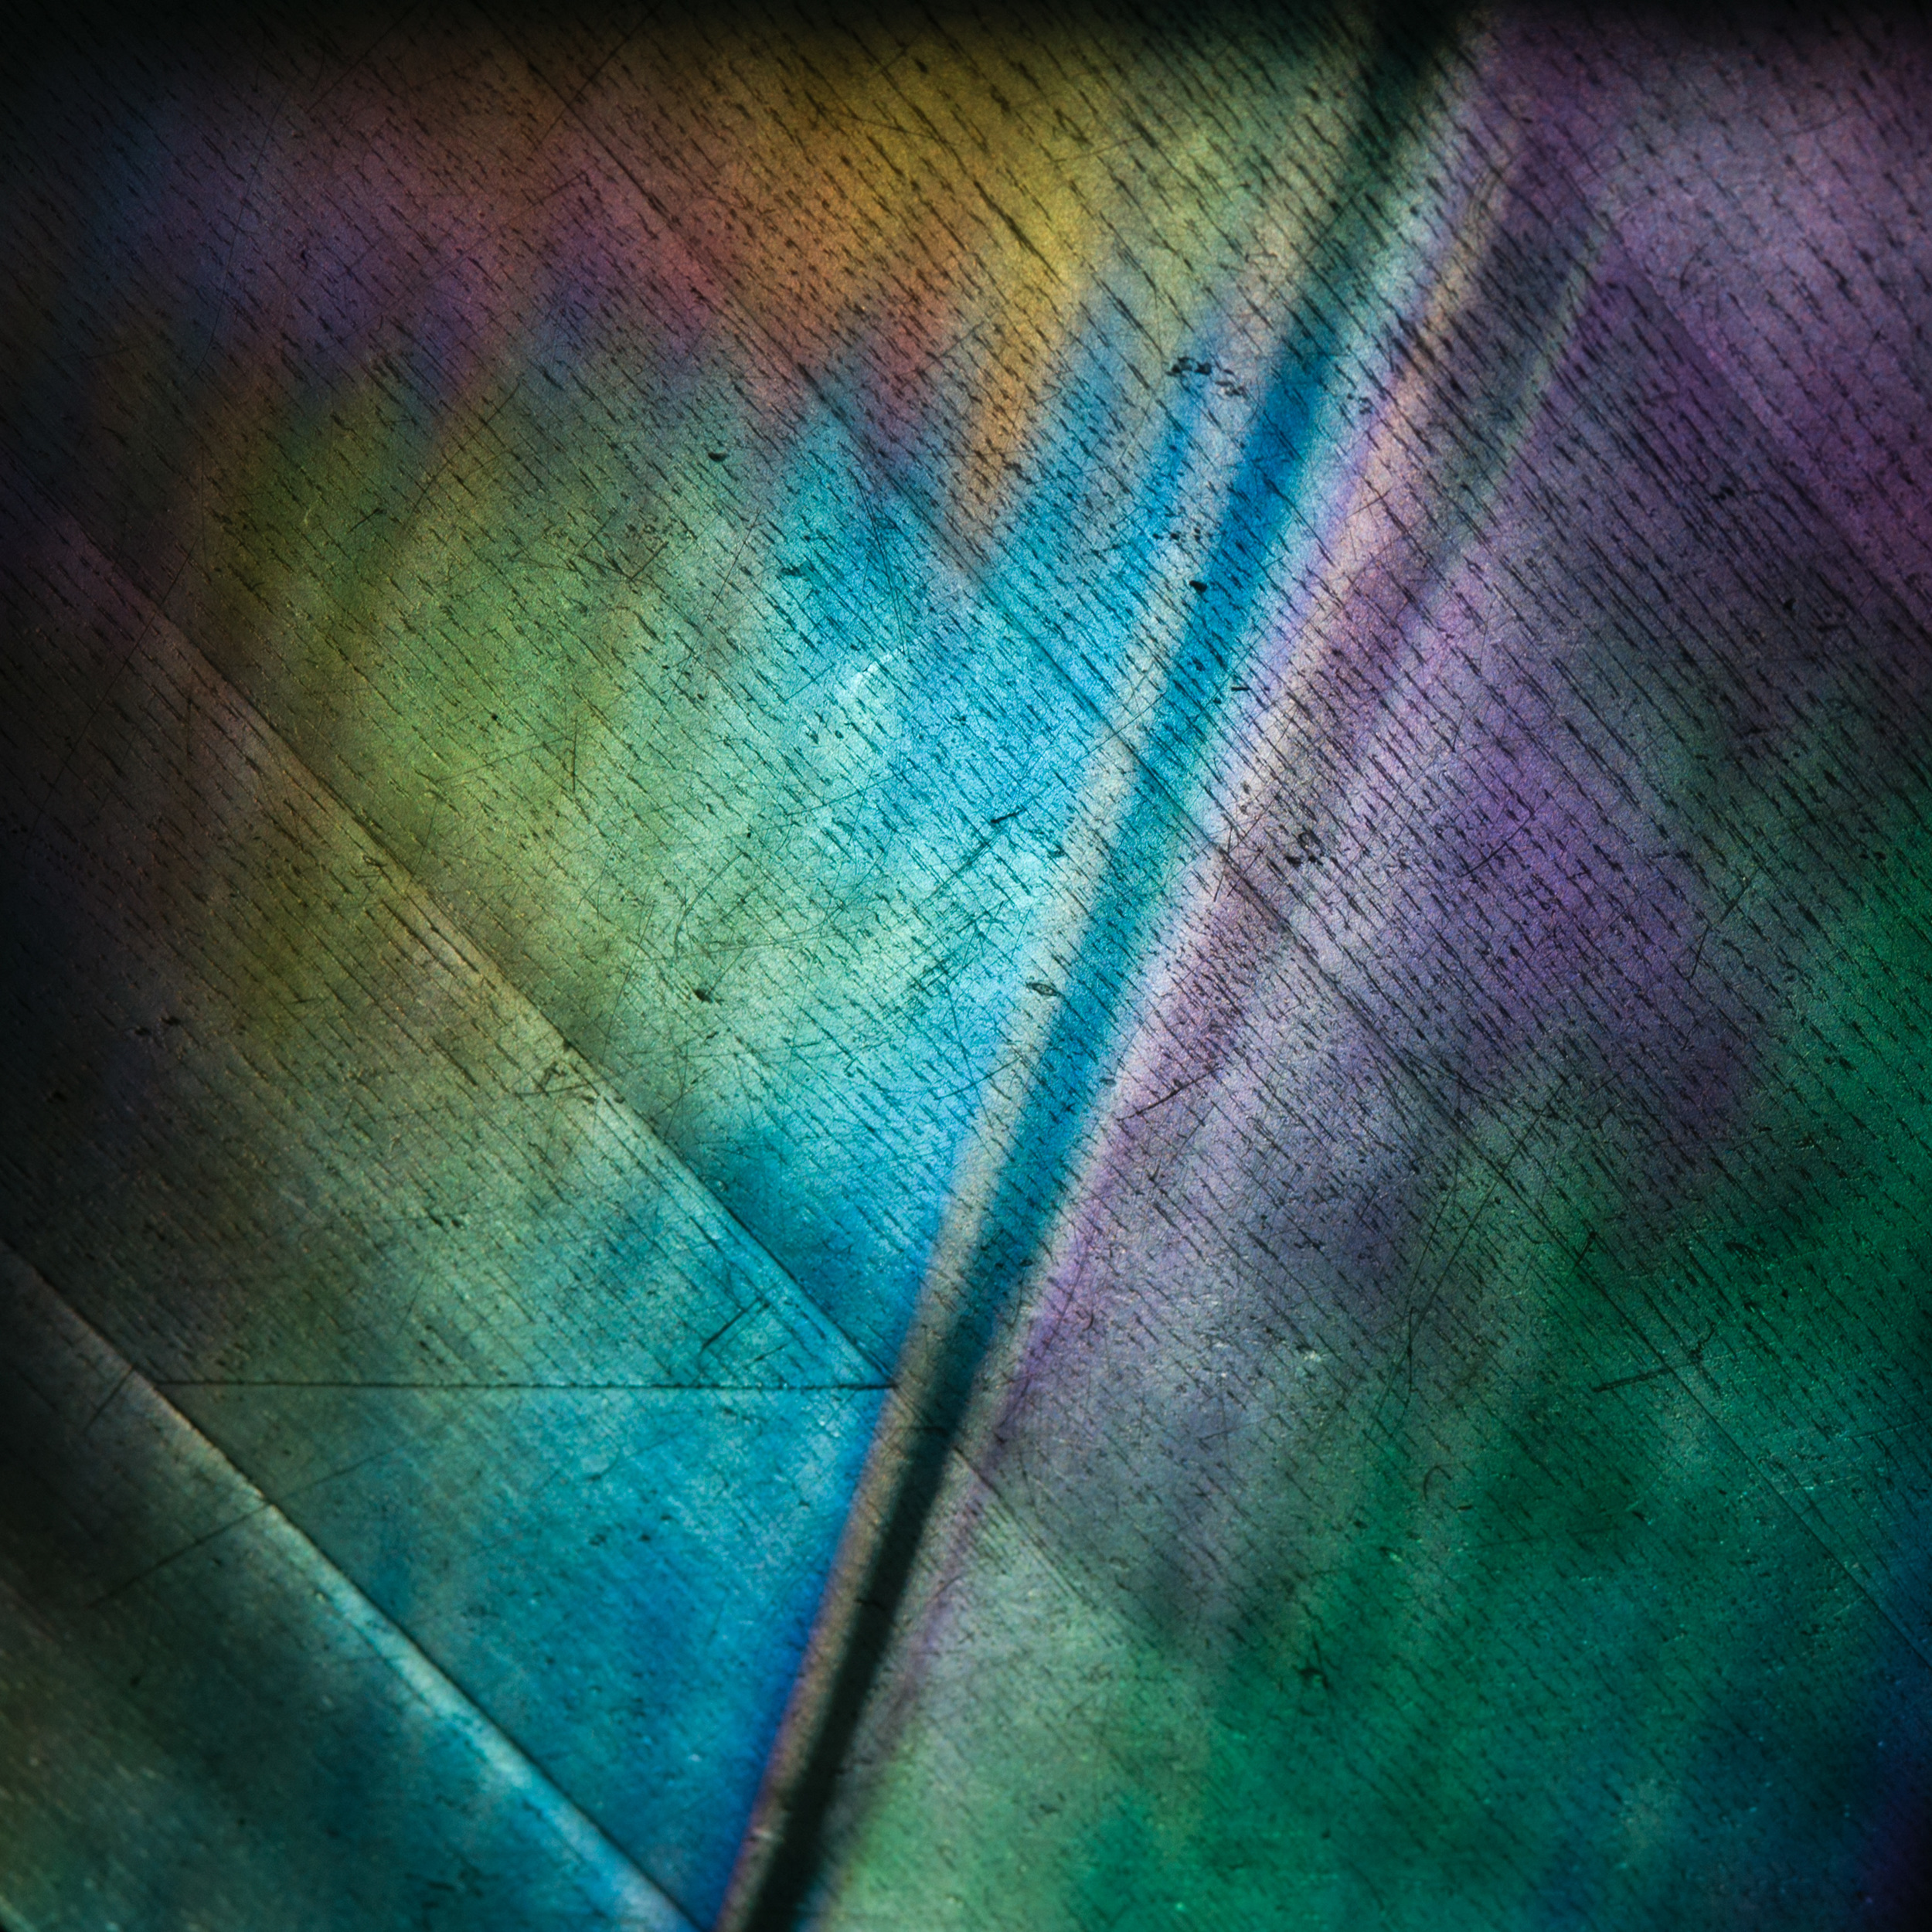  Refraction Study I, 2012 Archival pigment print 12 x 12 inches 